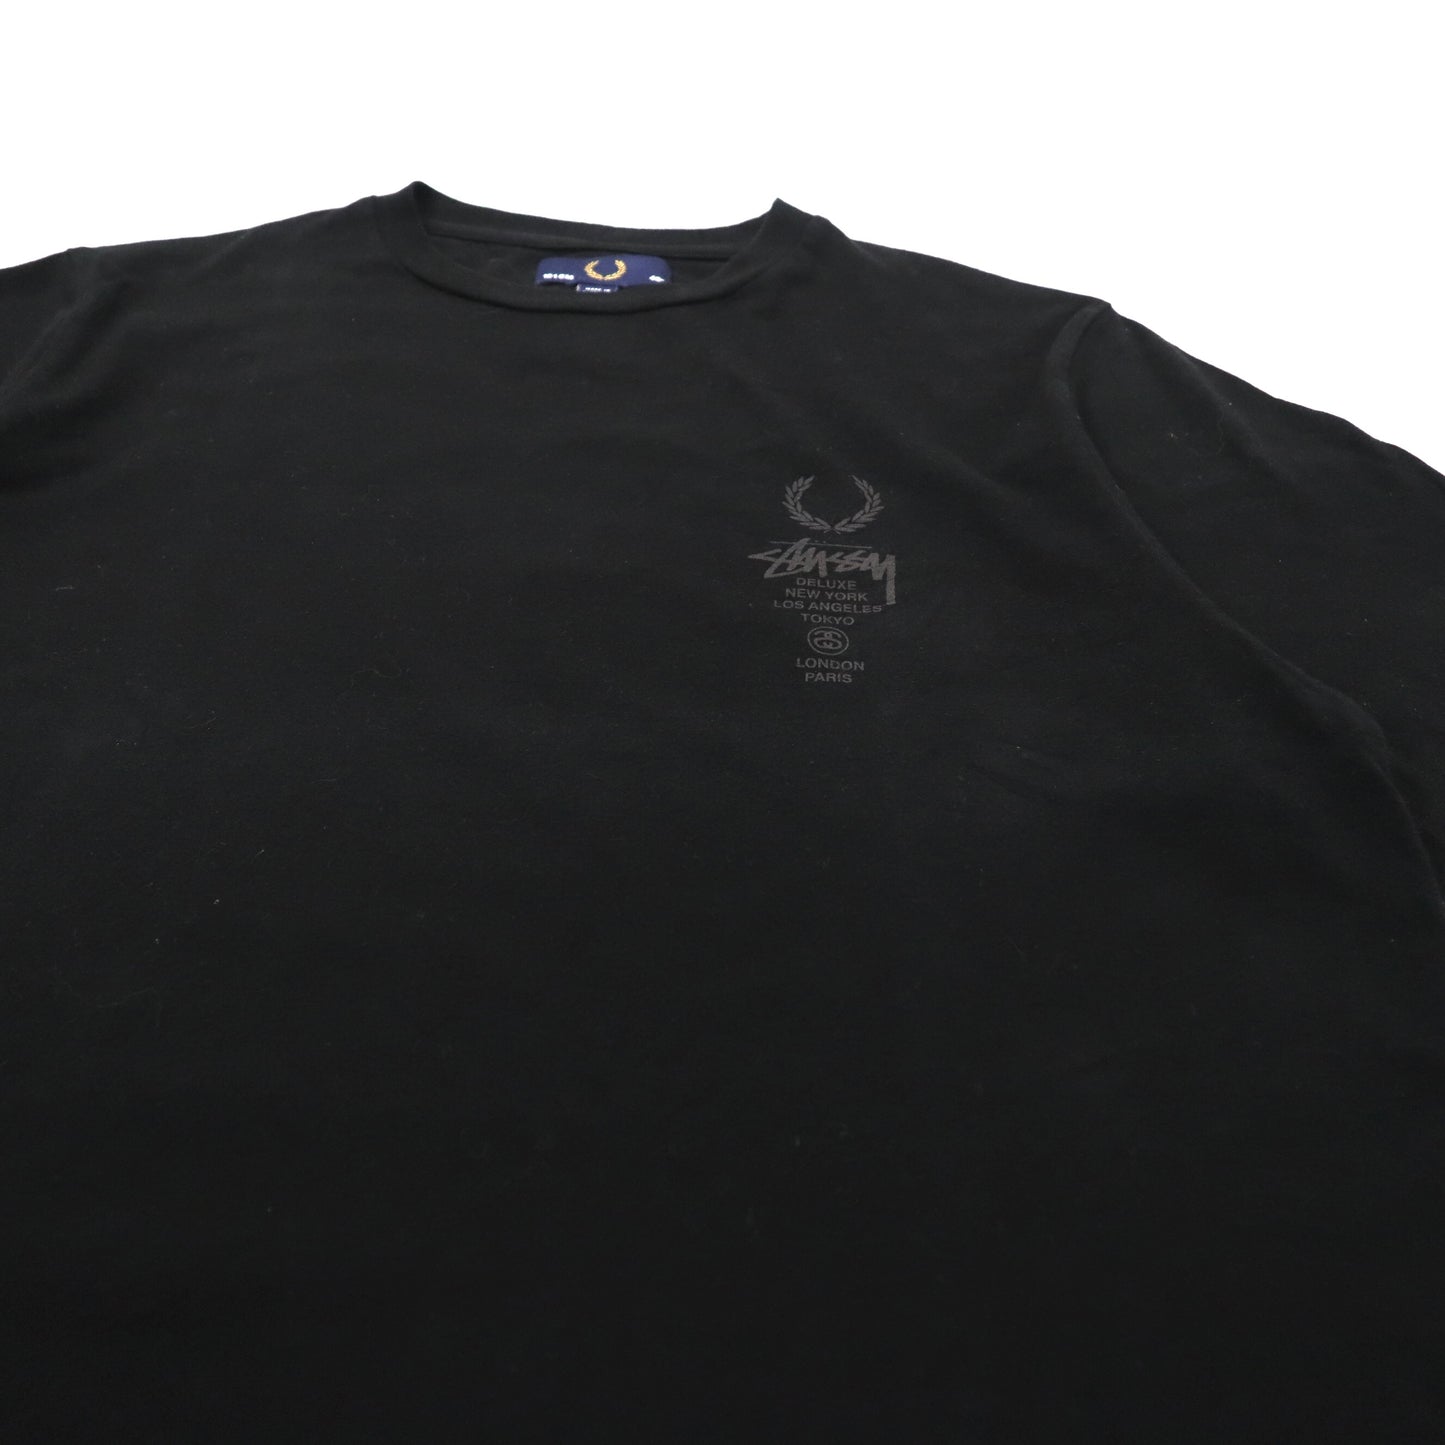 STUSSY DELUXE × FRED PERRY ワールドツアー Tシャツ 40 ブラック コットン ロゴプリント 両面プリント SM4174/102/2095/252 ポルトガル製